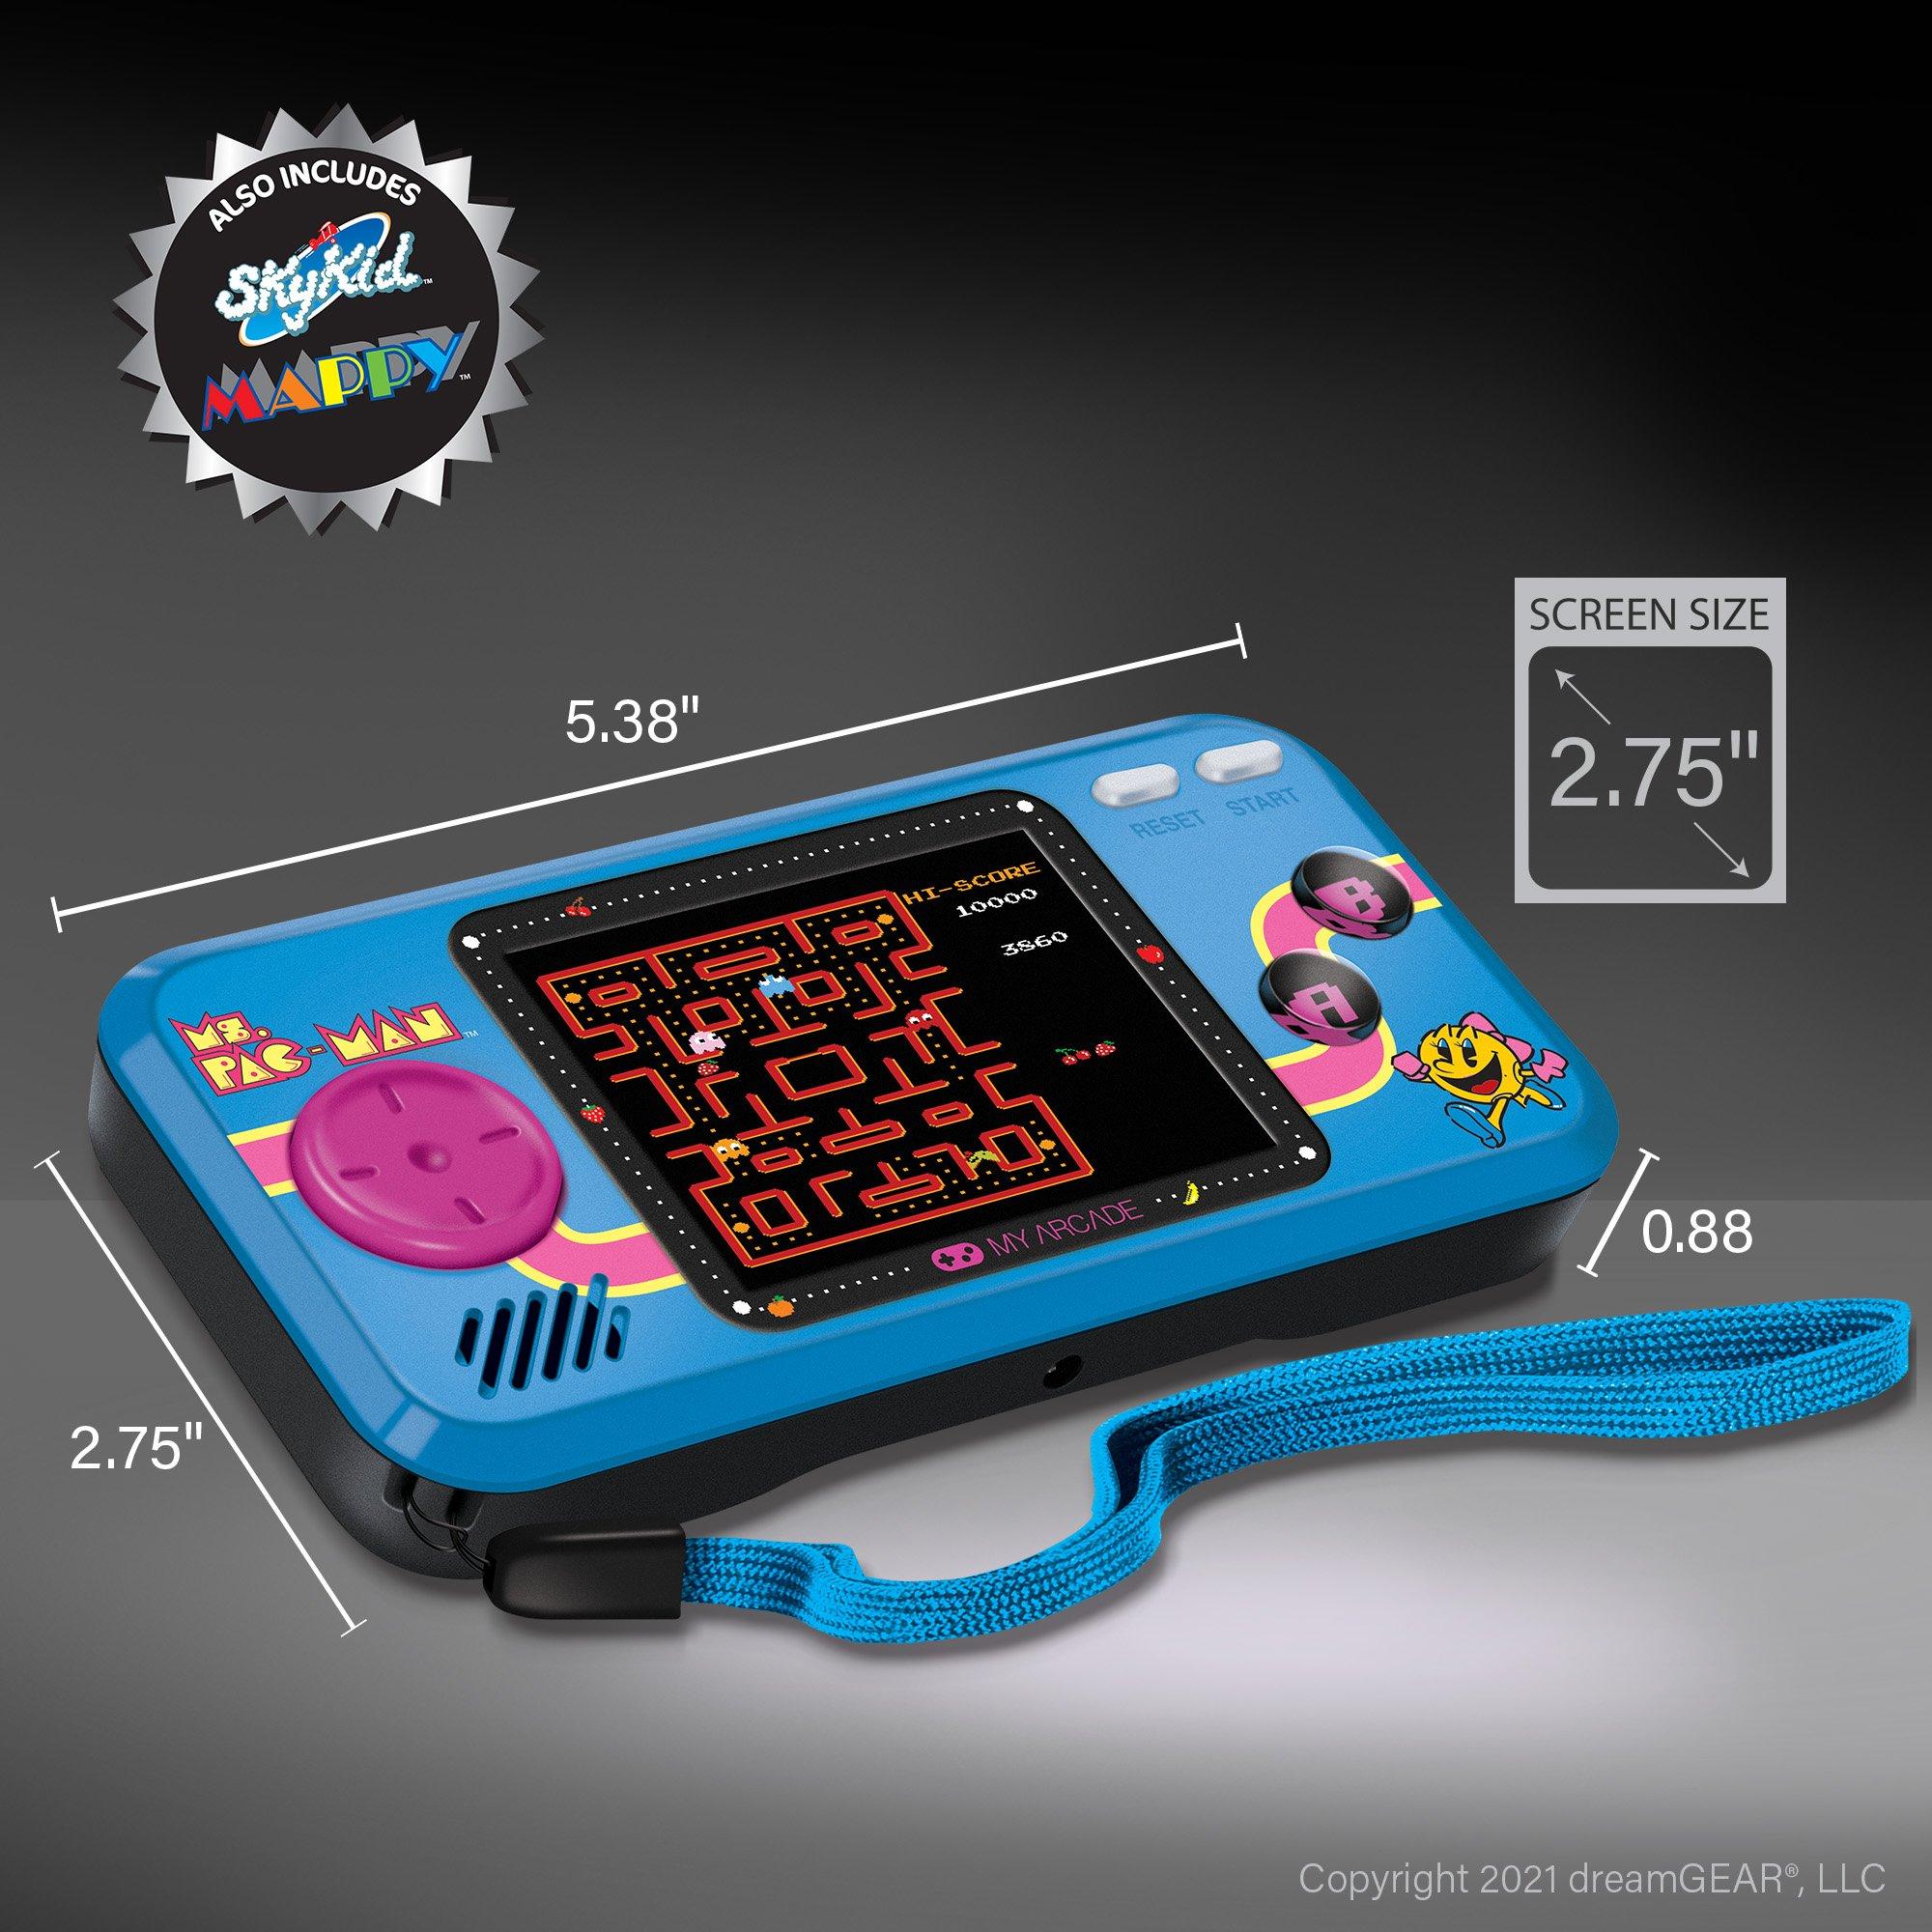 My Arcade Contra Pocket Player Handheld Portable Video Game System Ms. PAC-MAN